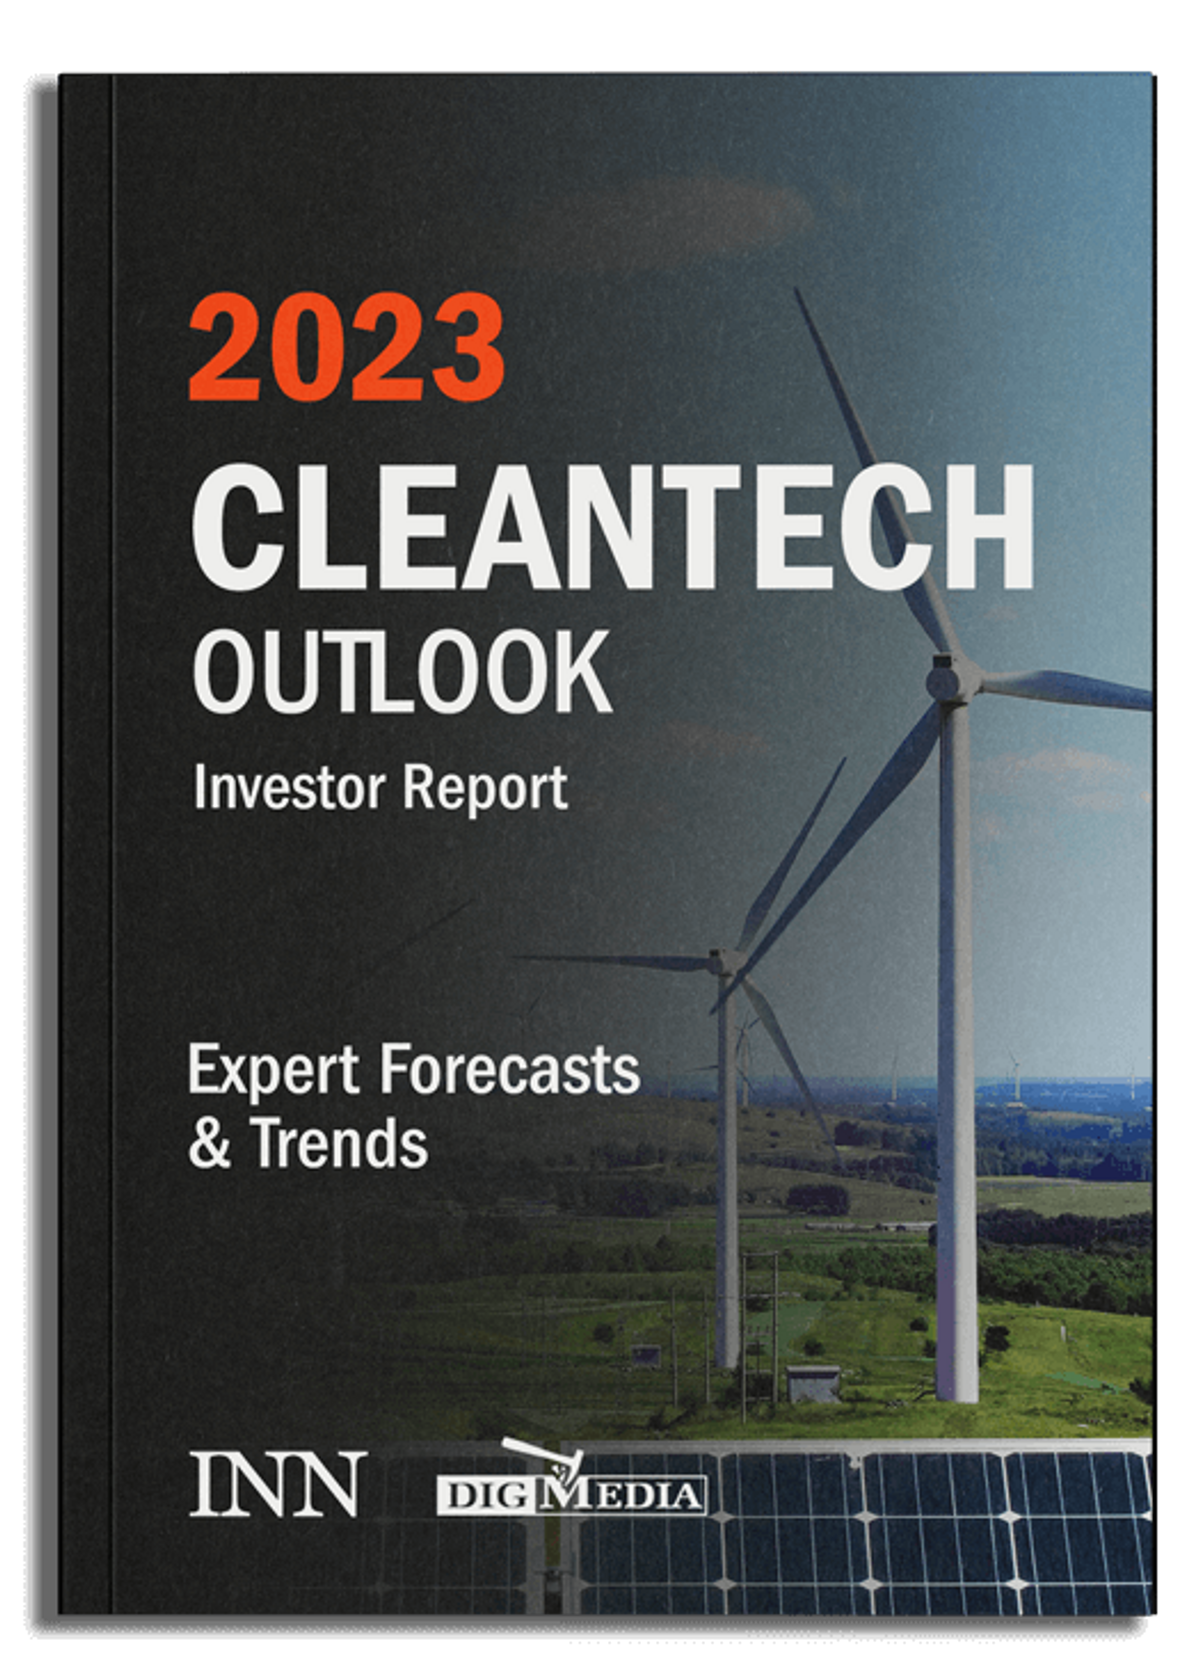 NEW! 2023 Cleantech Outlook Report